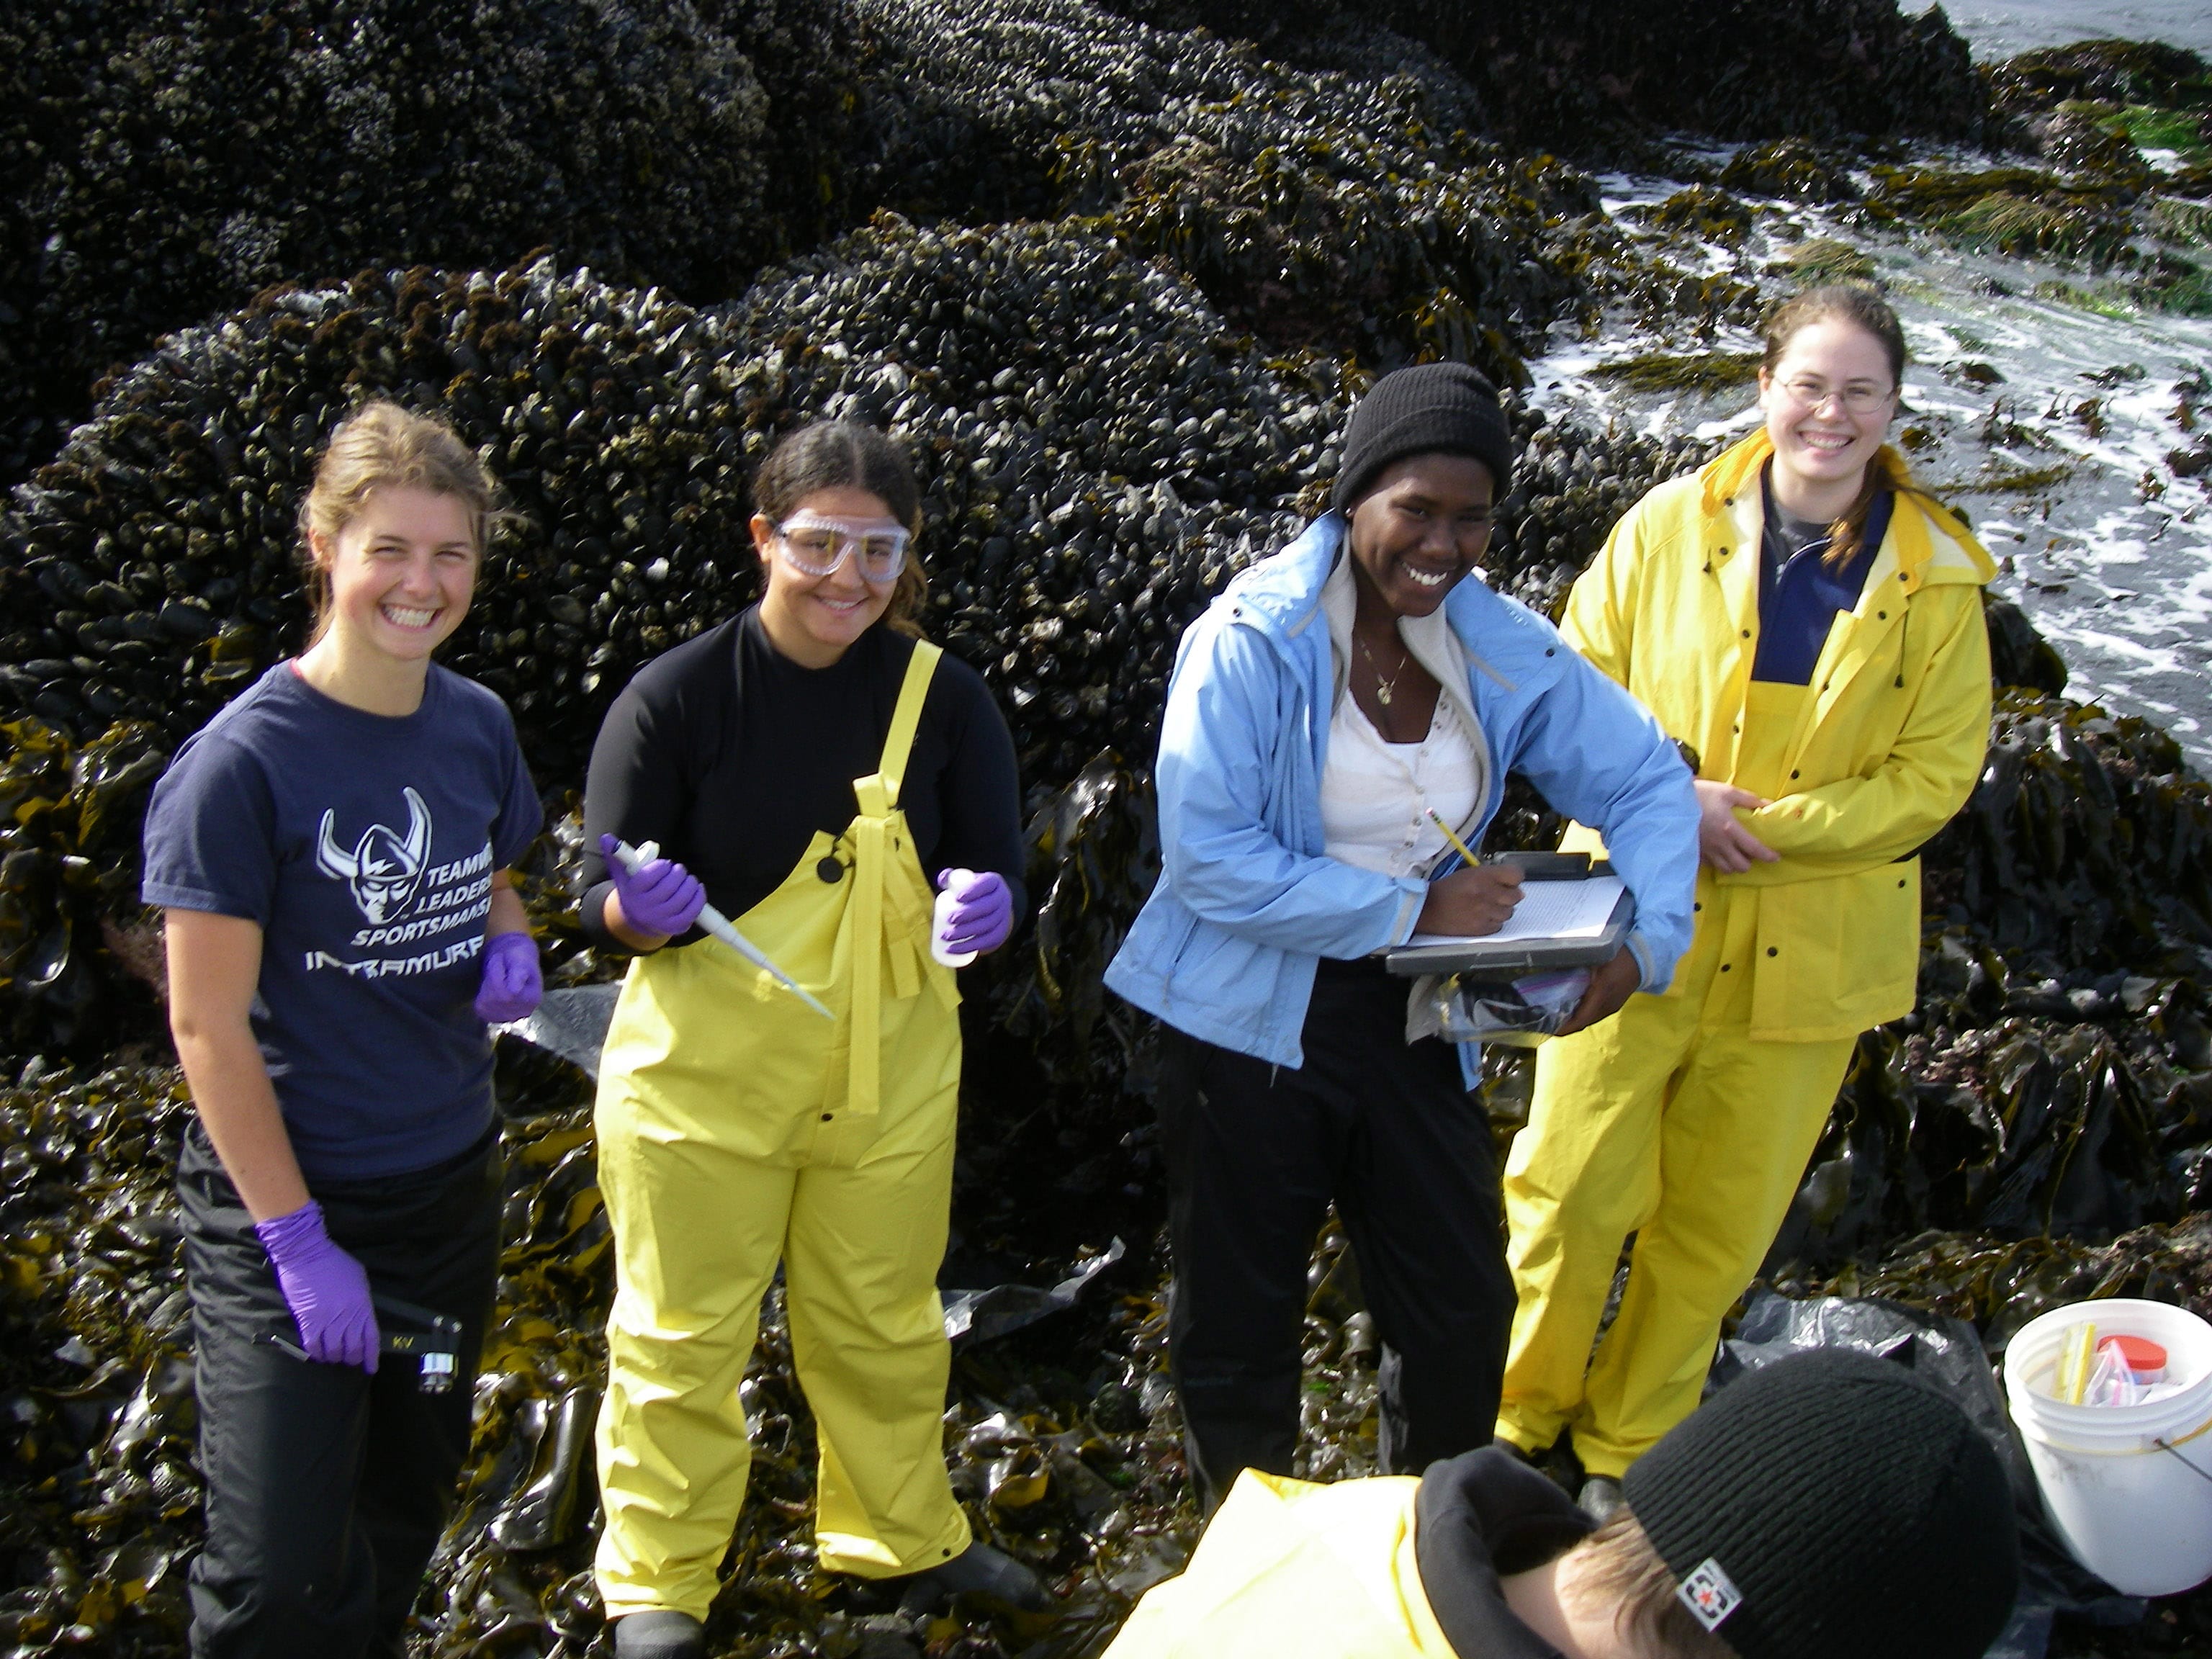 Students in ocean gear collect samples on a beach